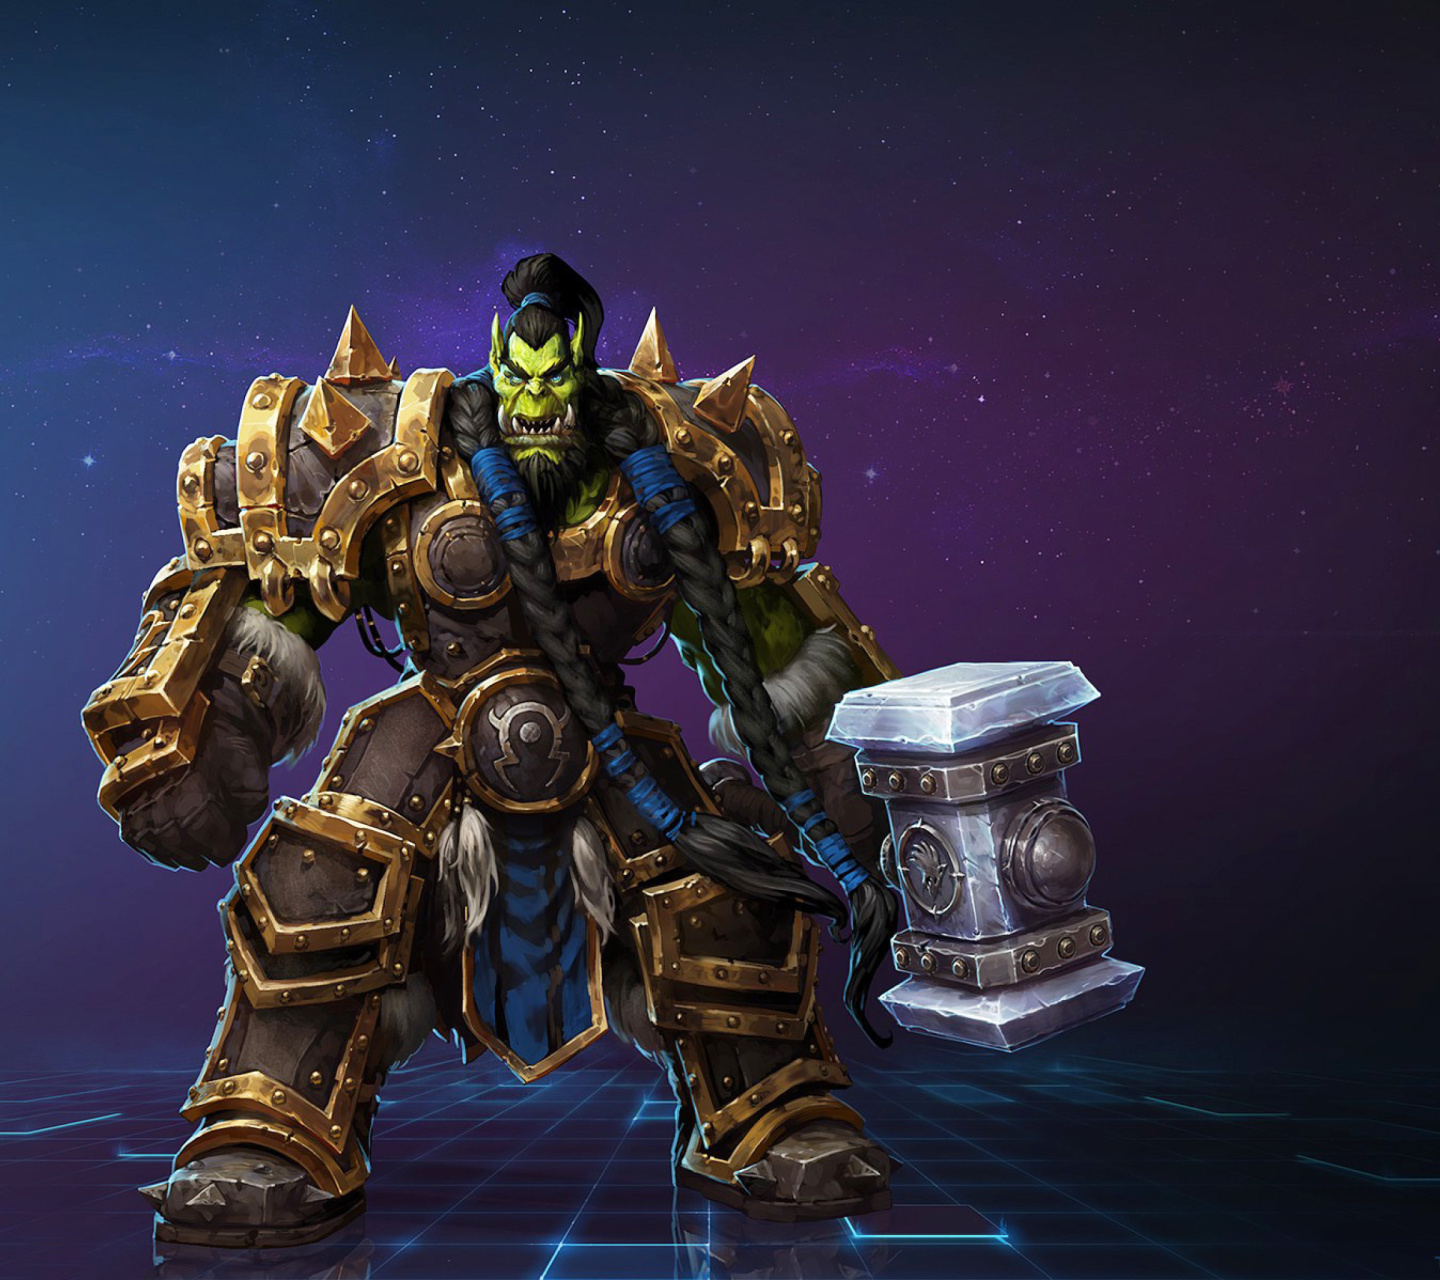 Sfondi Heroes of the Storm multiplayer online battle arena video game 1440x1280